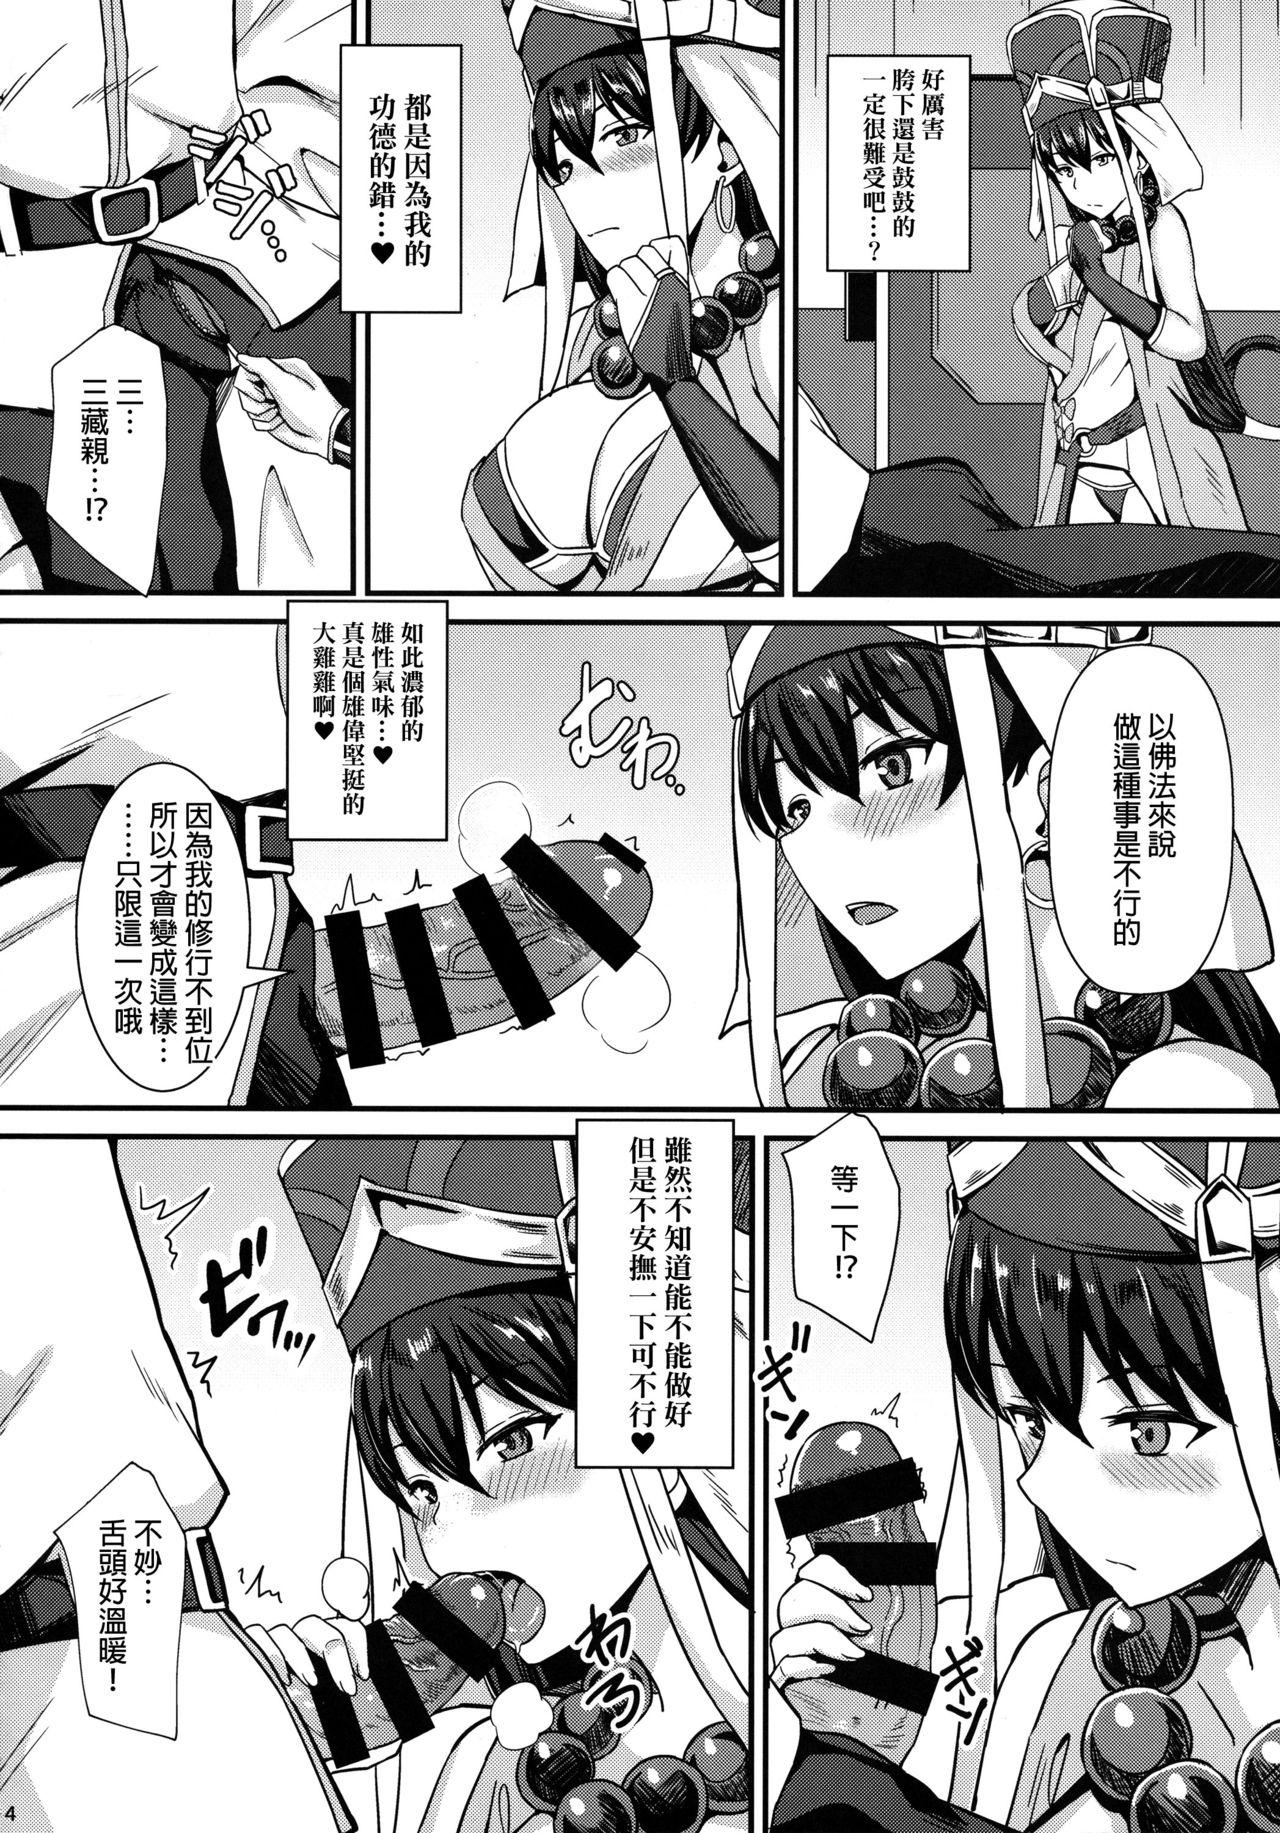 One Burning Halo - Fate grand order Taboo - Page 5